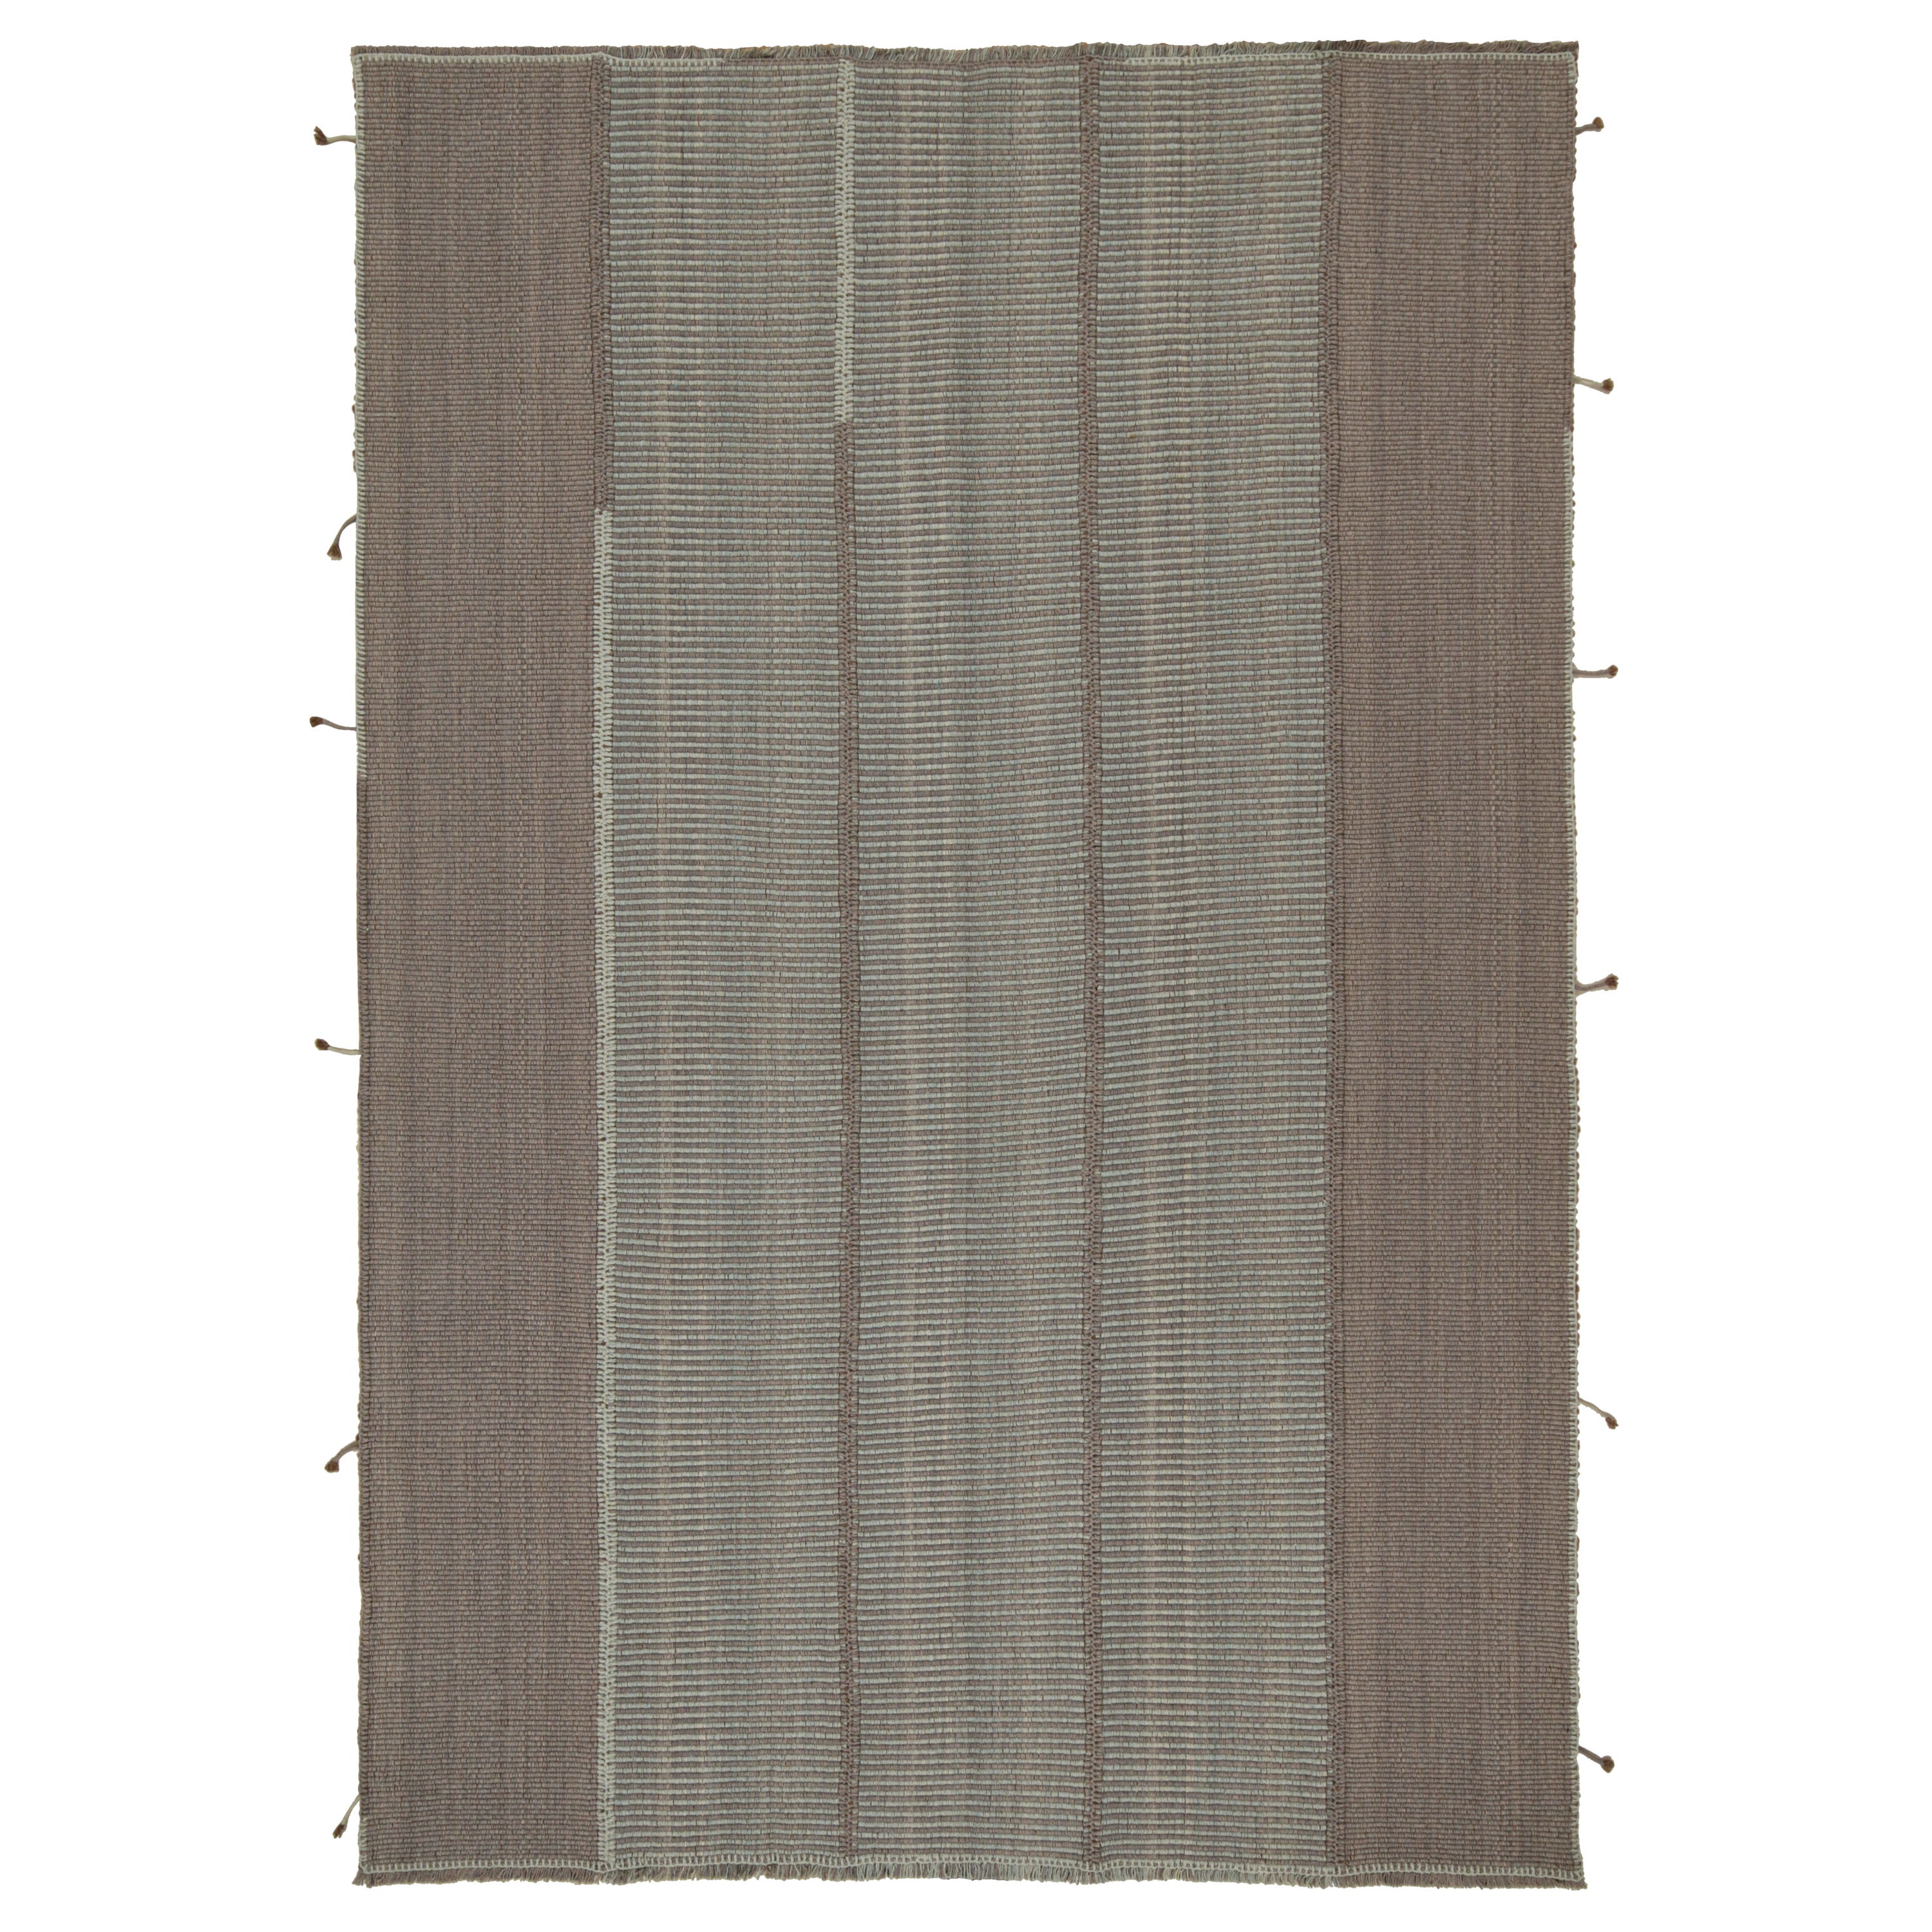 Rug & Kilim’s Contemporary Kilim in Grey and Blue Stripes with Brown Accents